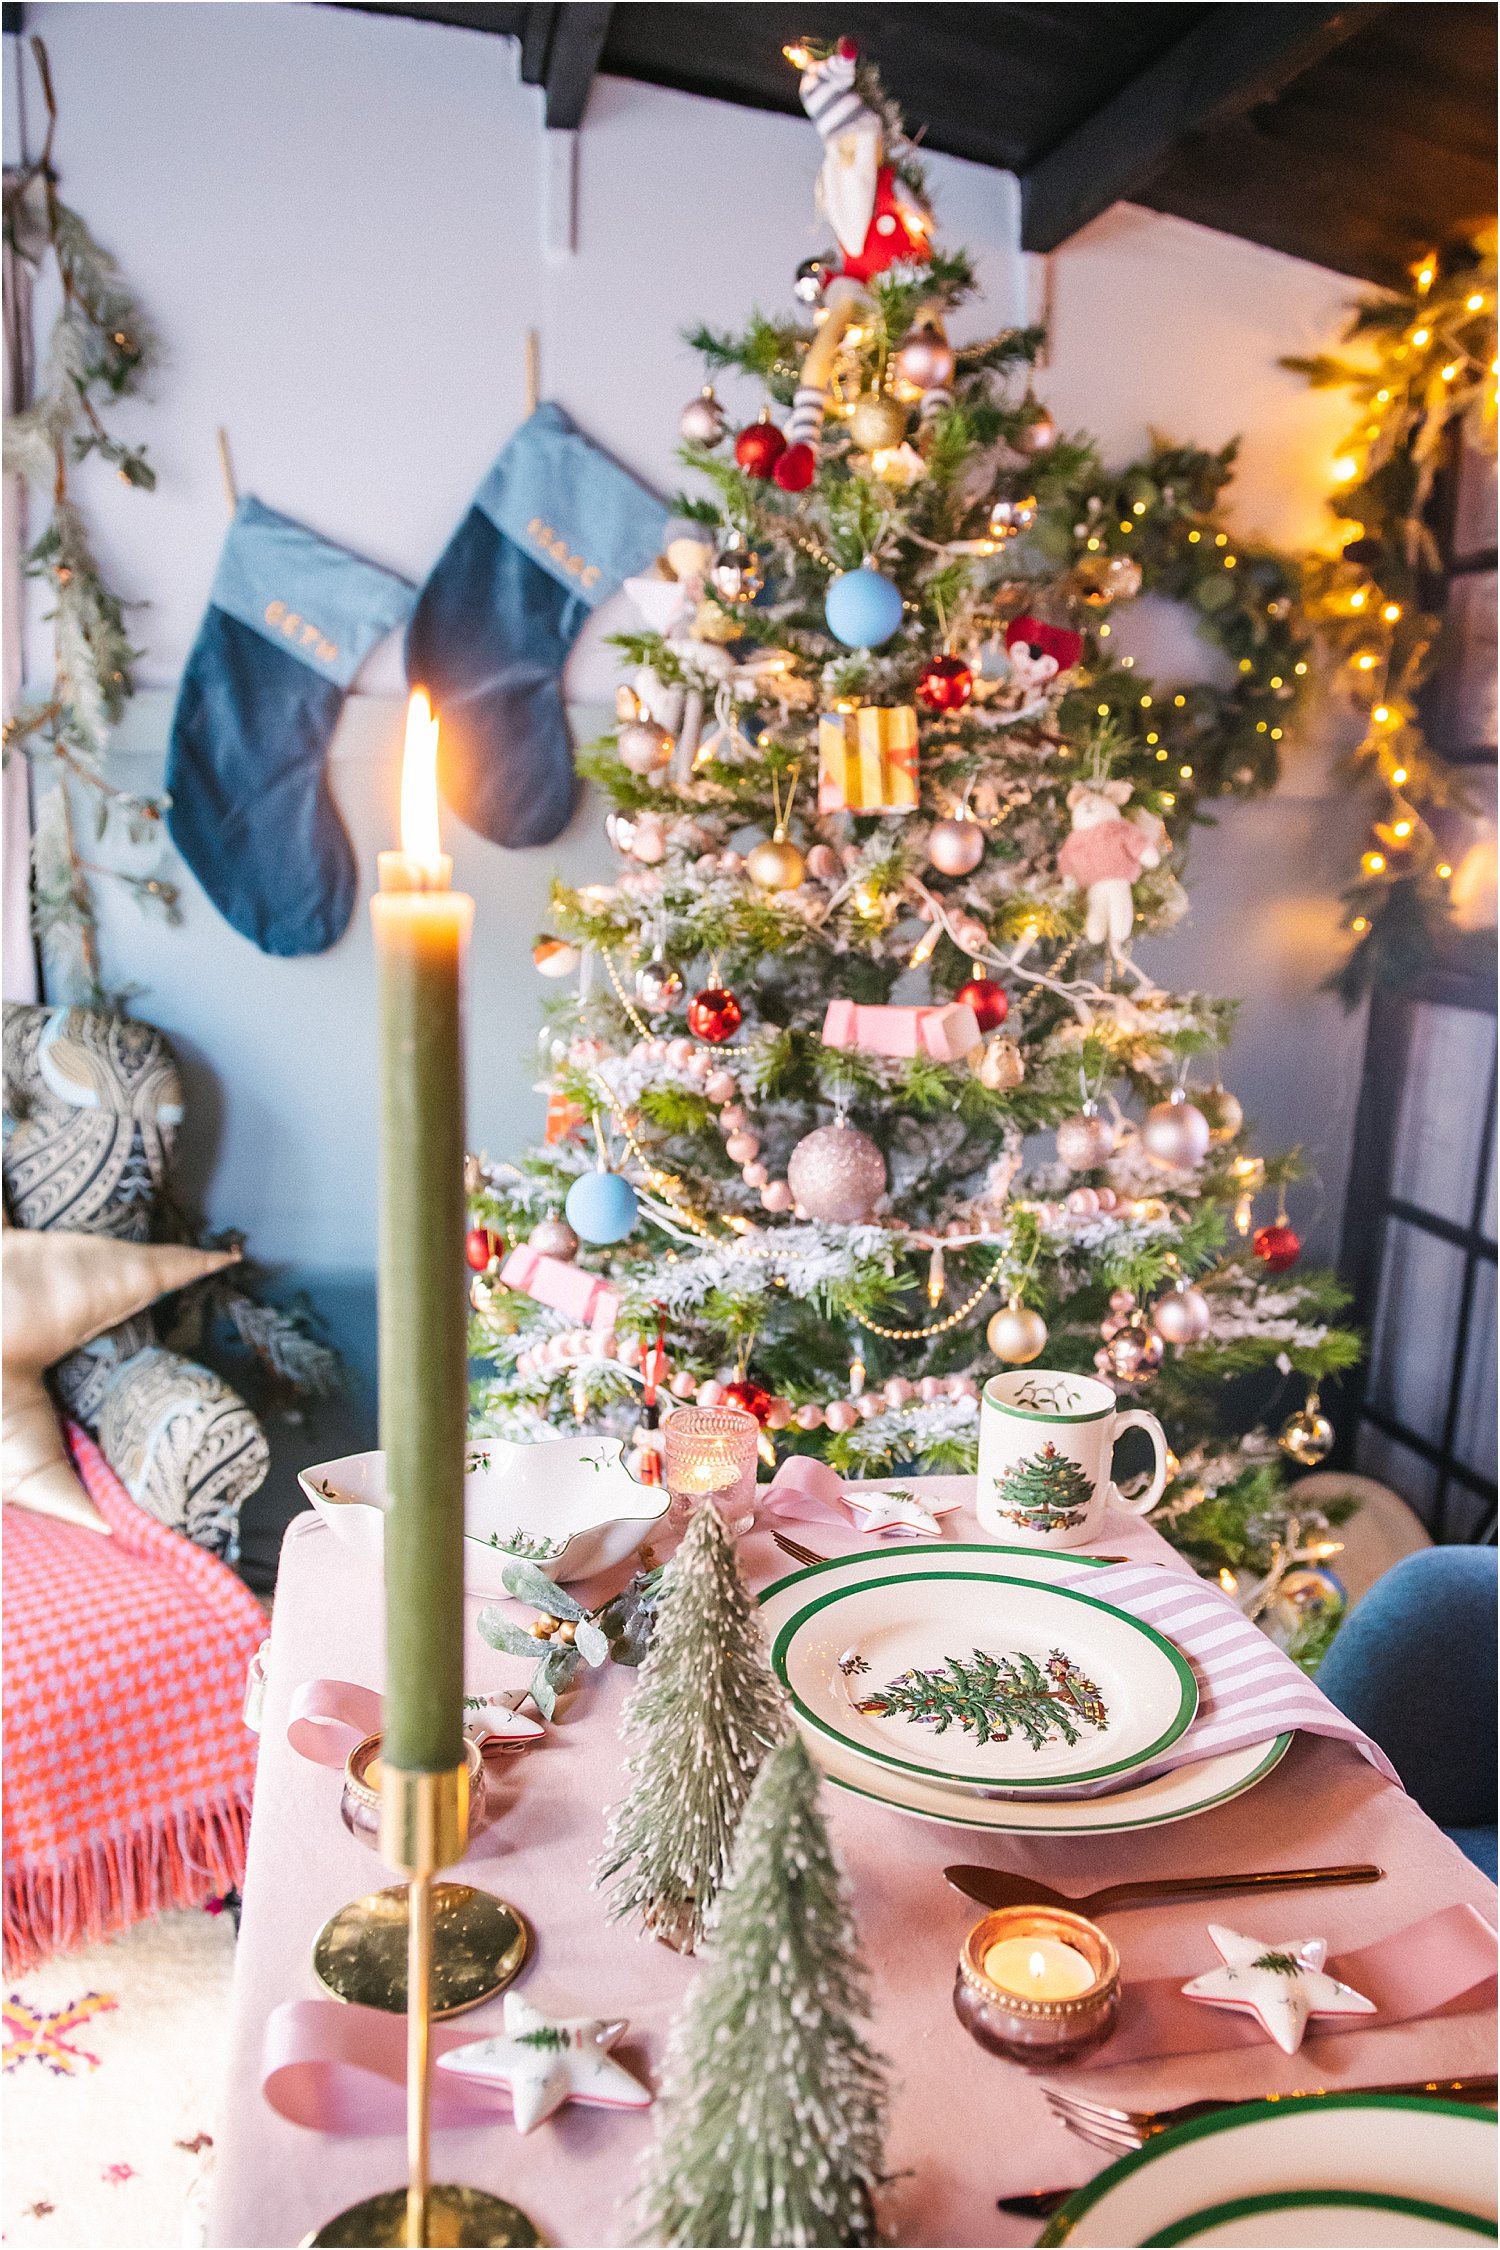 10-Christmas-table-setting-ideas-pink-green-lily-sawyer-photo